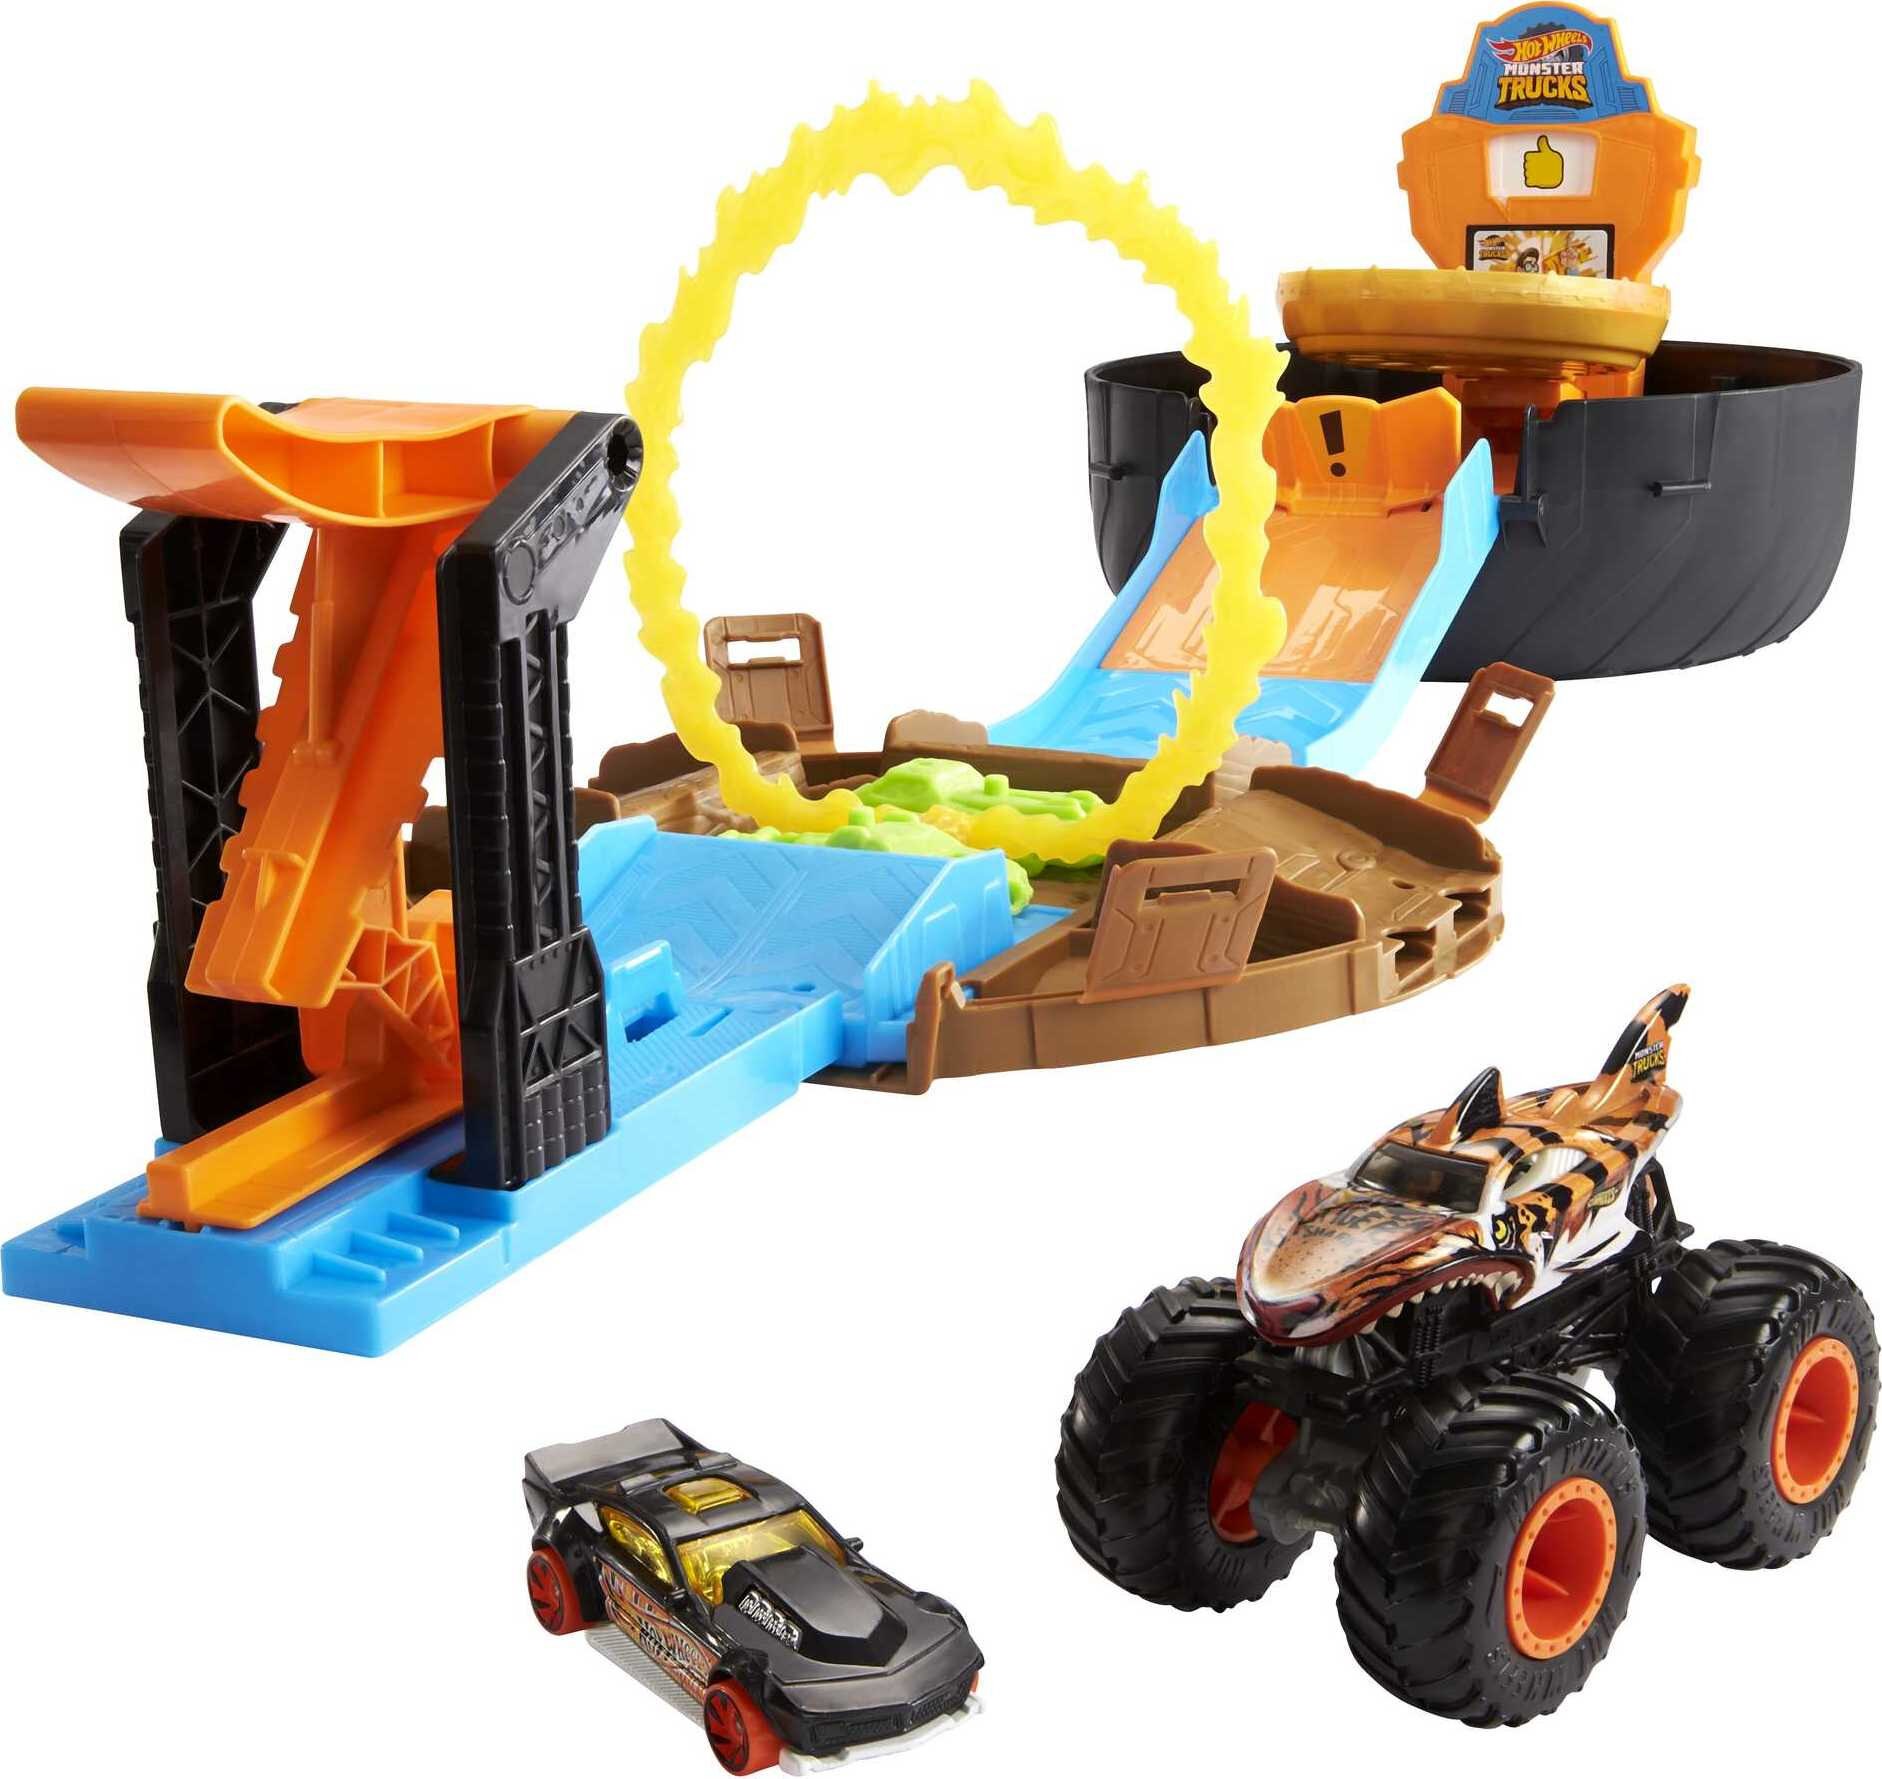 Hot Wheels Monster Trucks Stunt Tire Playset with 1:64 Scale Toy Car & Tiger Shark Truck - image 1 of 7